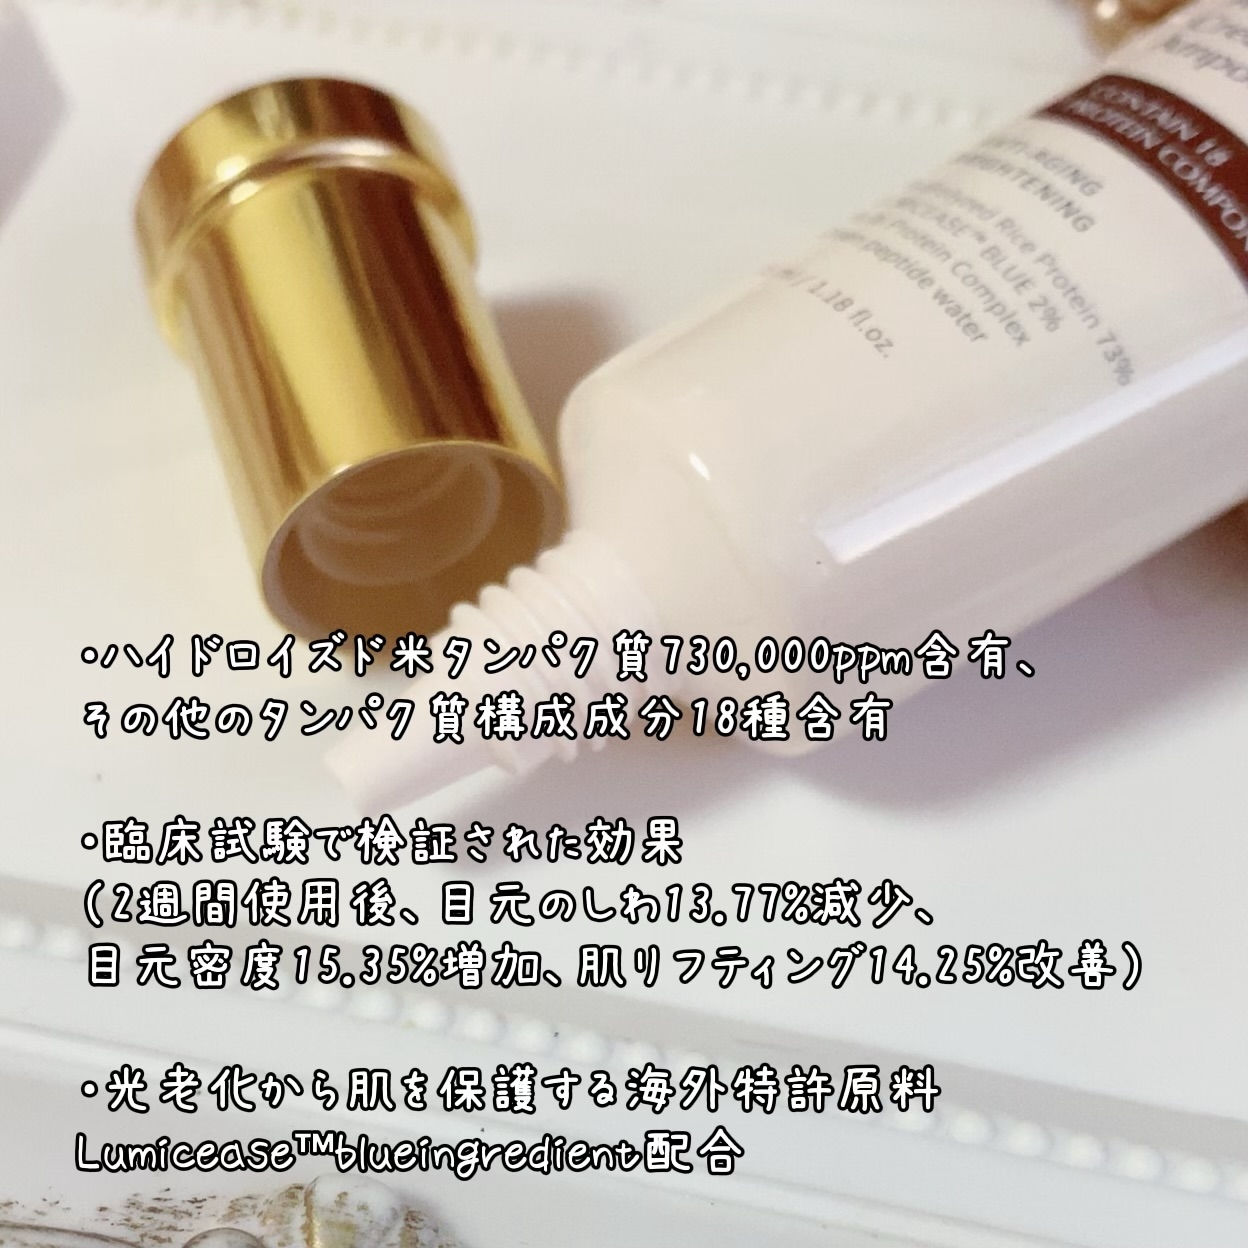 MAYBENA Perfect Lifting Protein Cream Ampoule 73を使った珈琲豆♡さんのクチコミ画像2